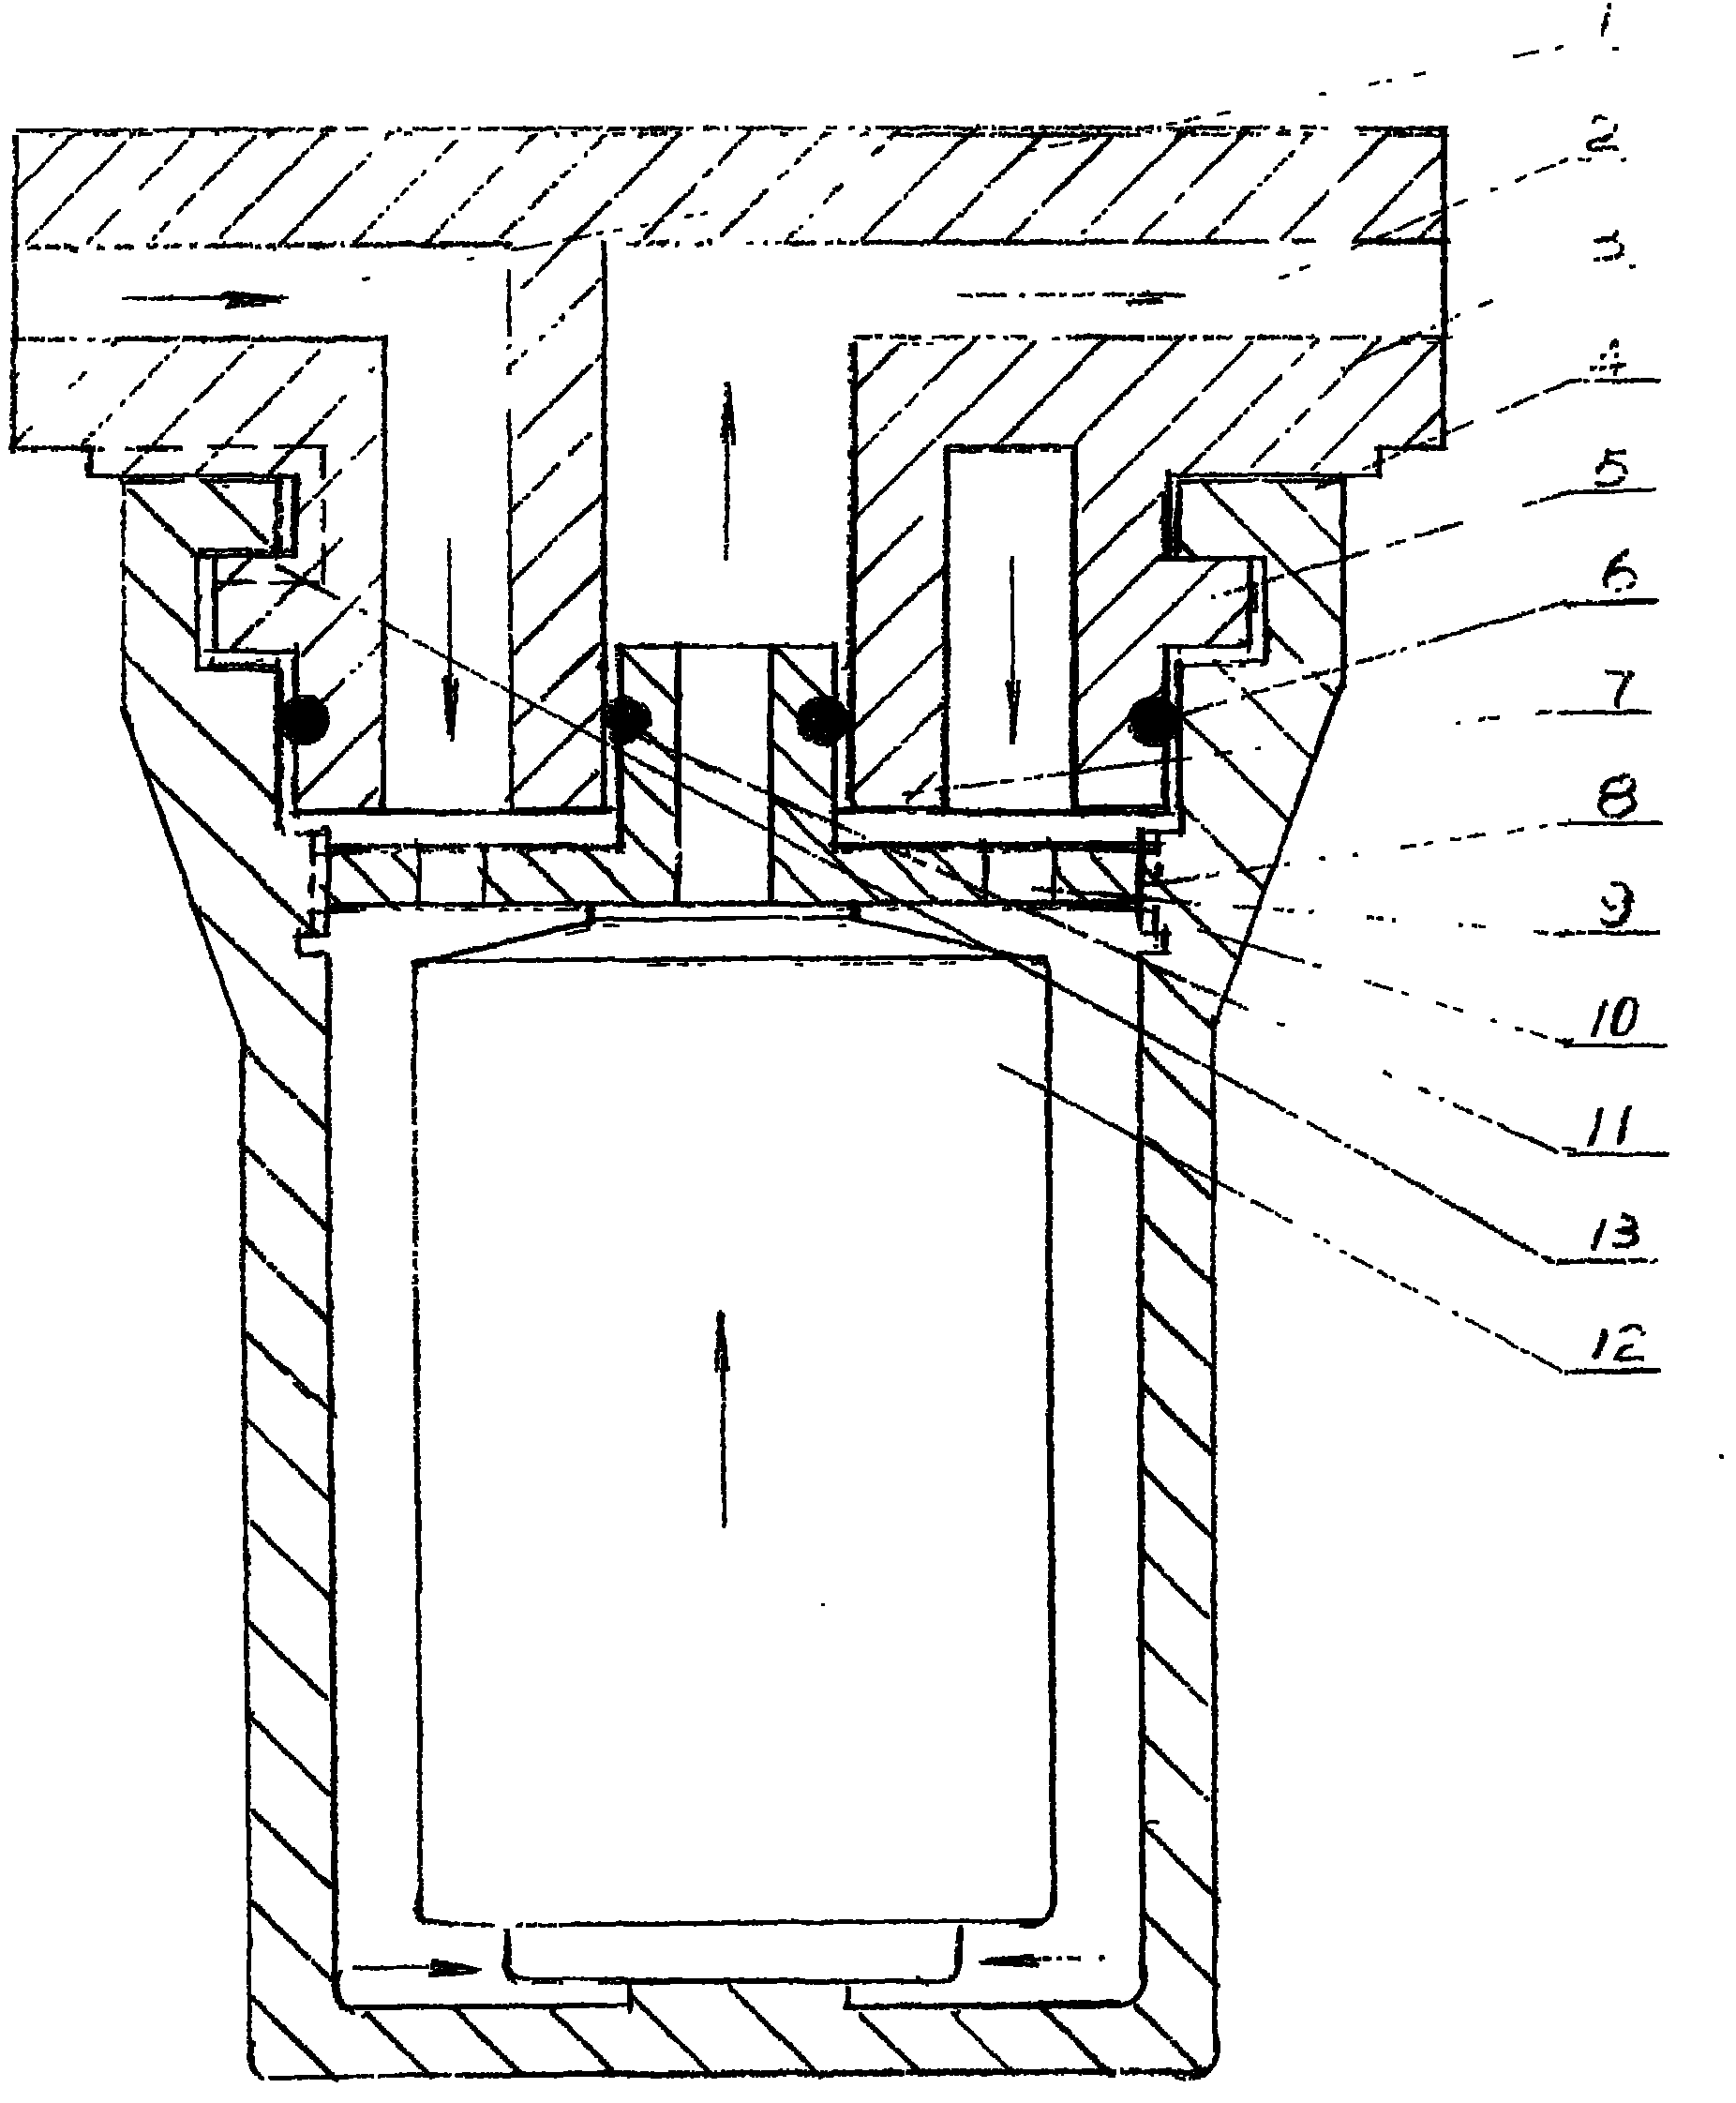 Filtering shell of water purifier and connecting method with base